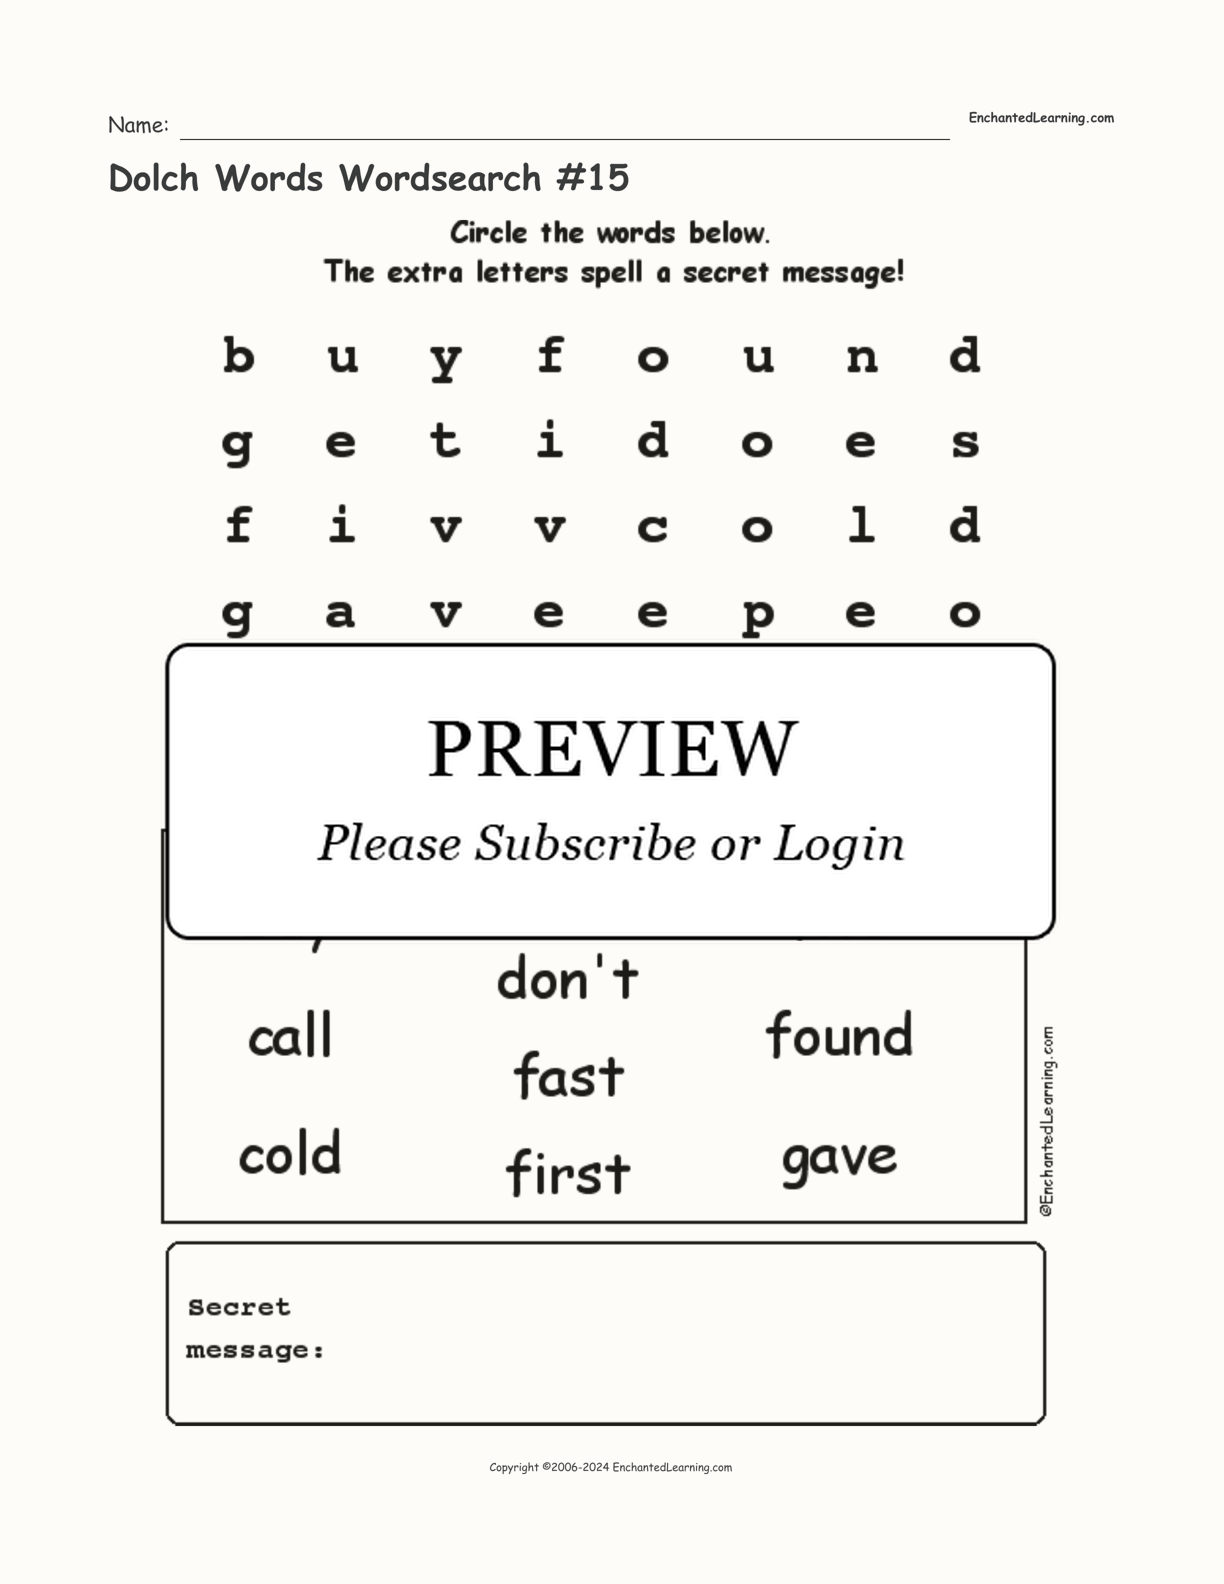 Dolch Words Wordsearch #15 interactive worksheet page 1